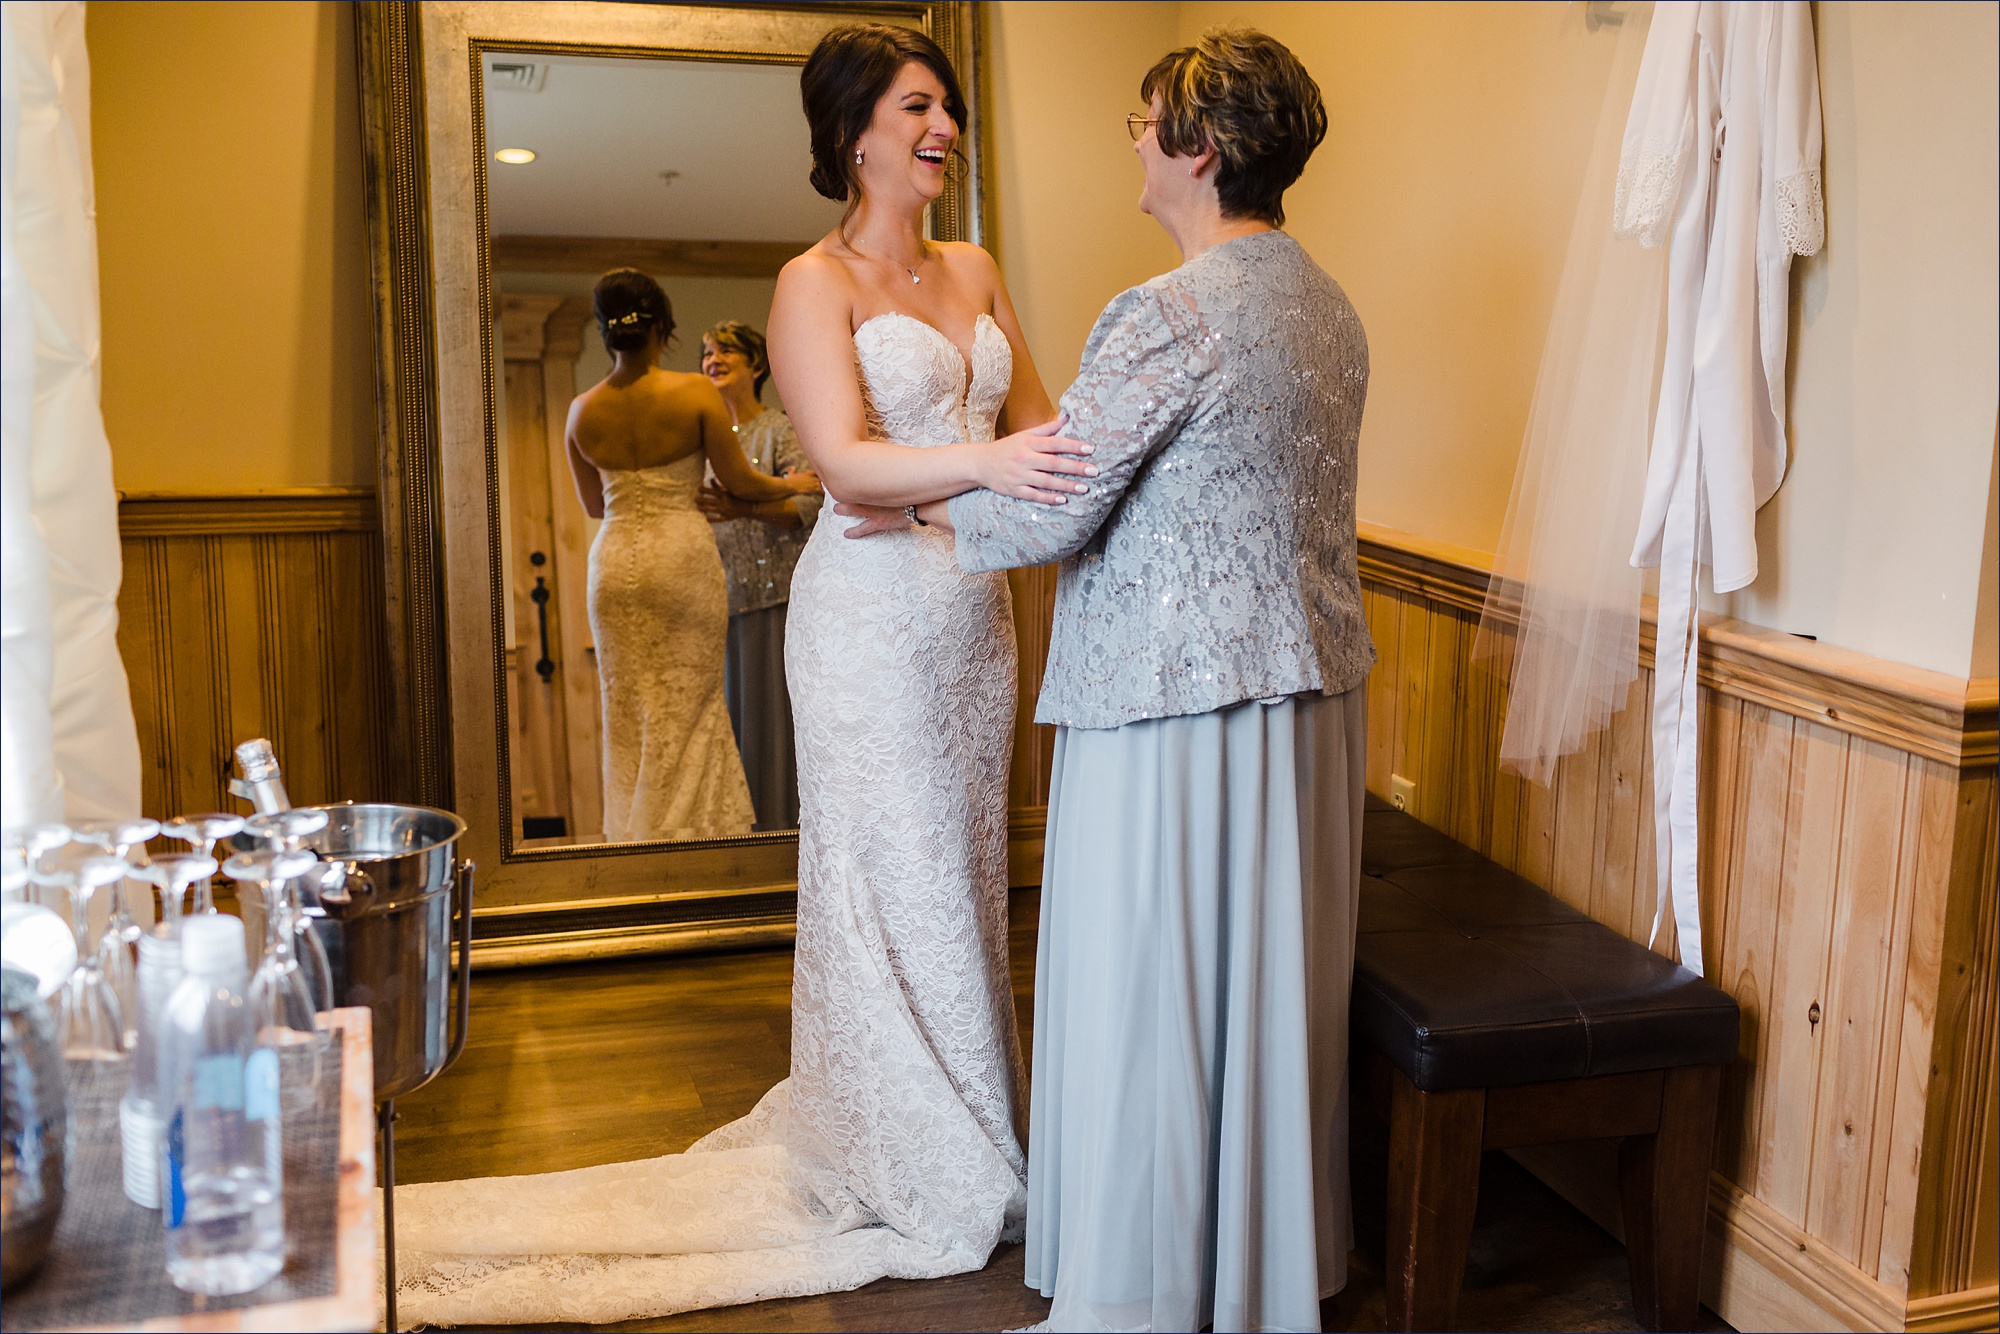 The bride and her mom hold one another before the wedding day starts in Maine